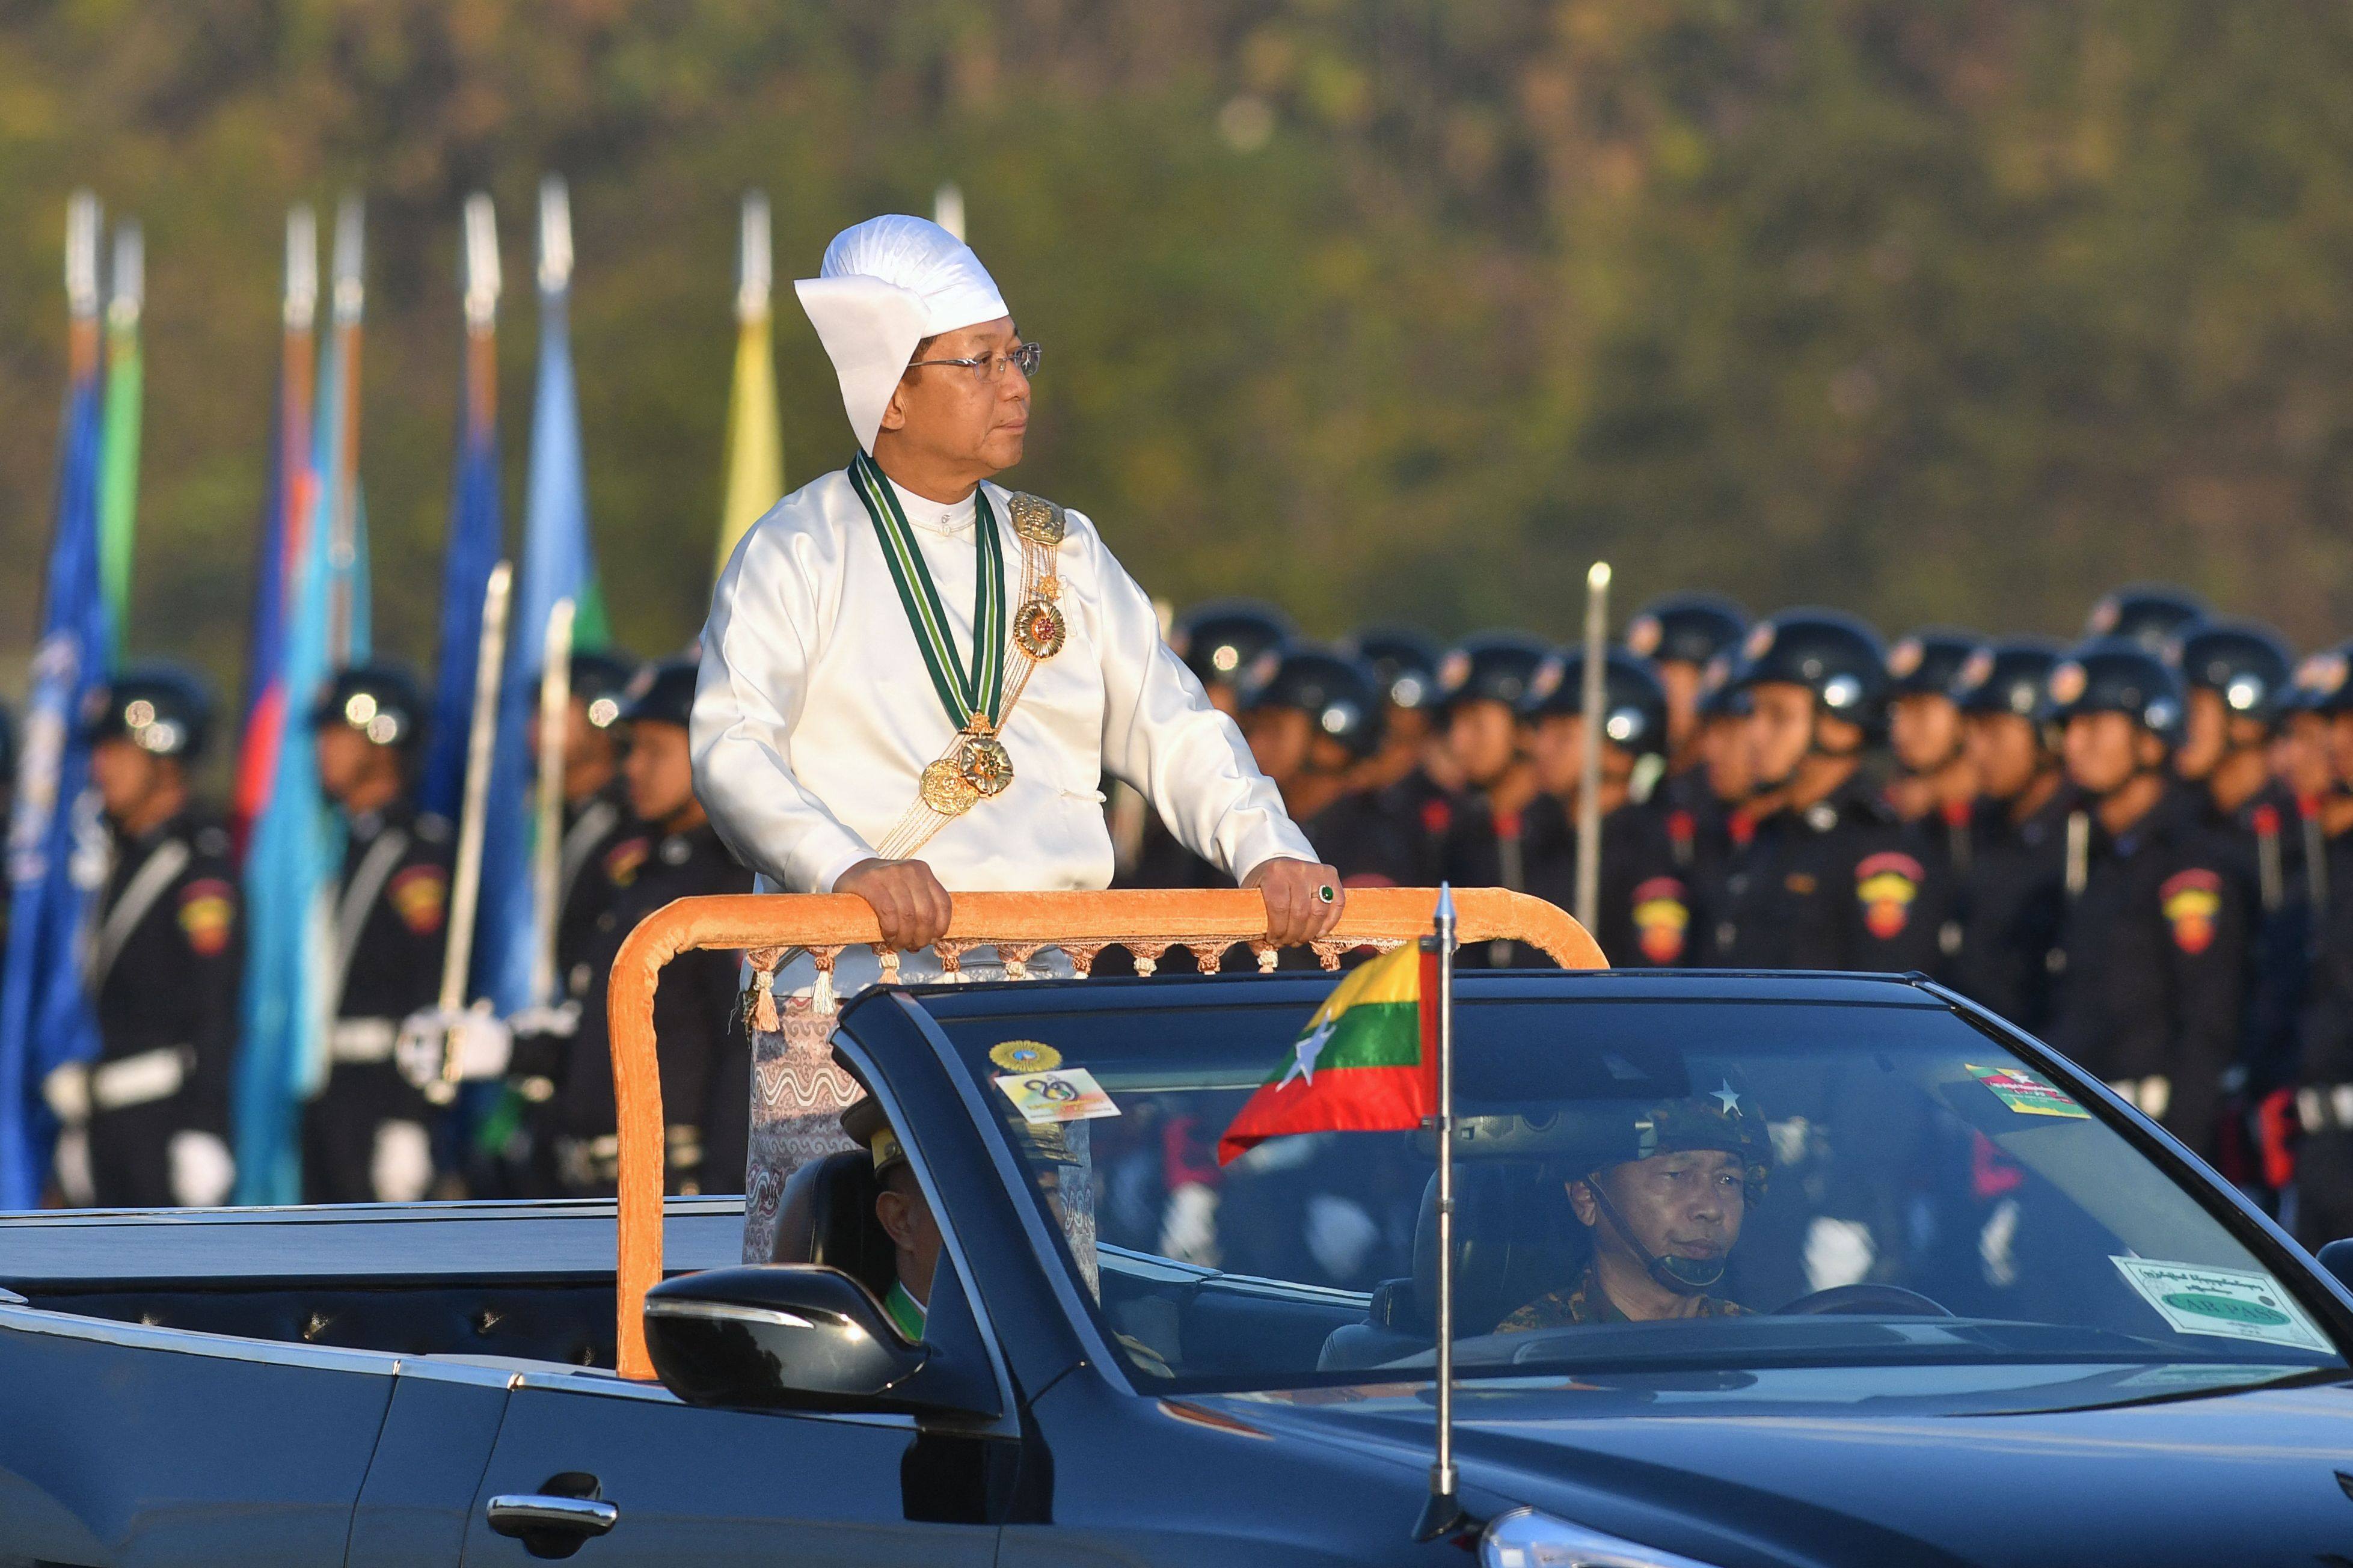 Myanmar’s military chief Min Aung Hlaing stands in a car as he oversees a military display to mark the country’s Independence Day in Naypyidaw earlier this month. Photo: AFP